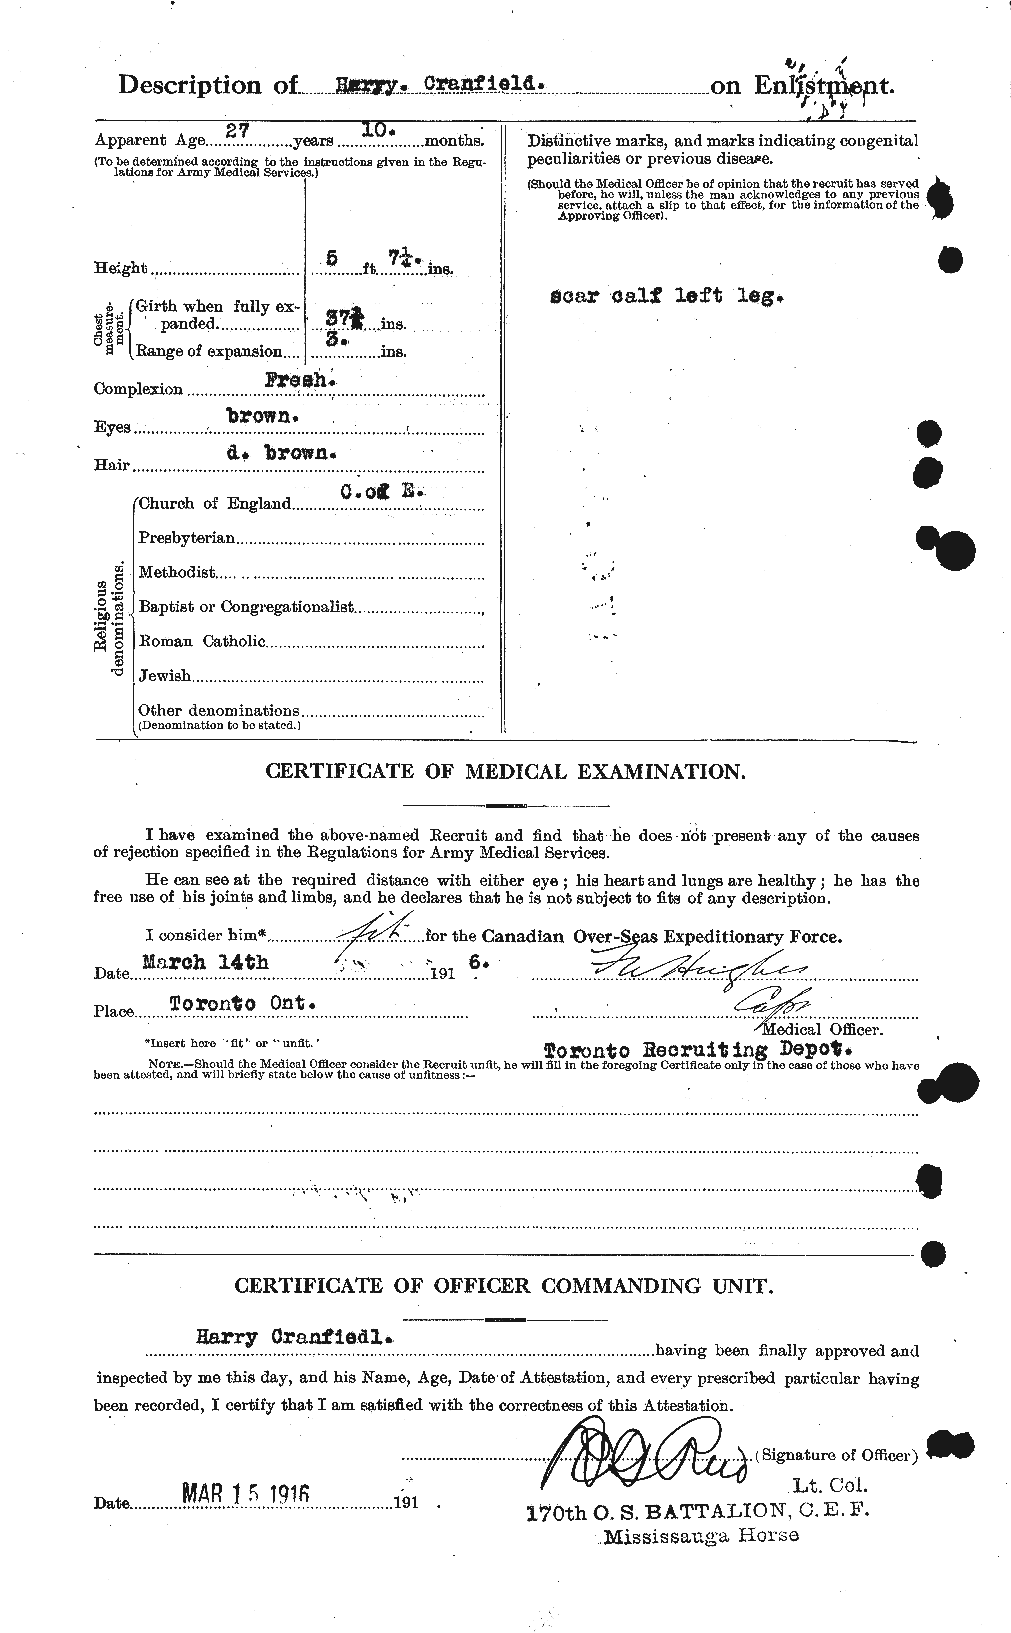 Personnel Records of the First World War - CEF 061728b